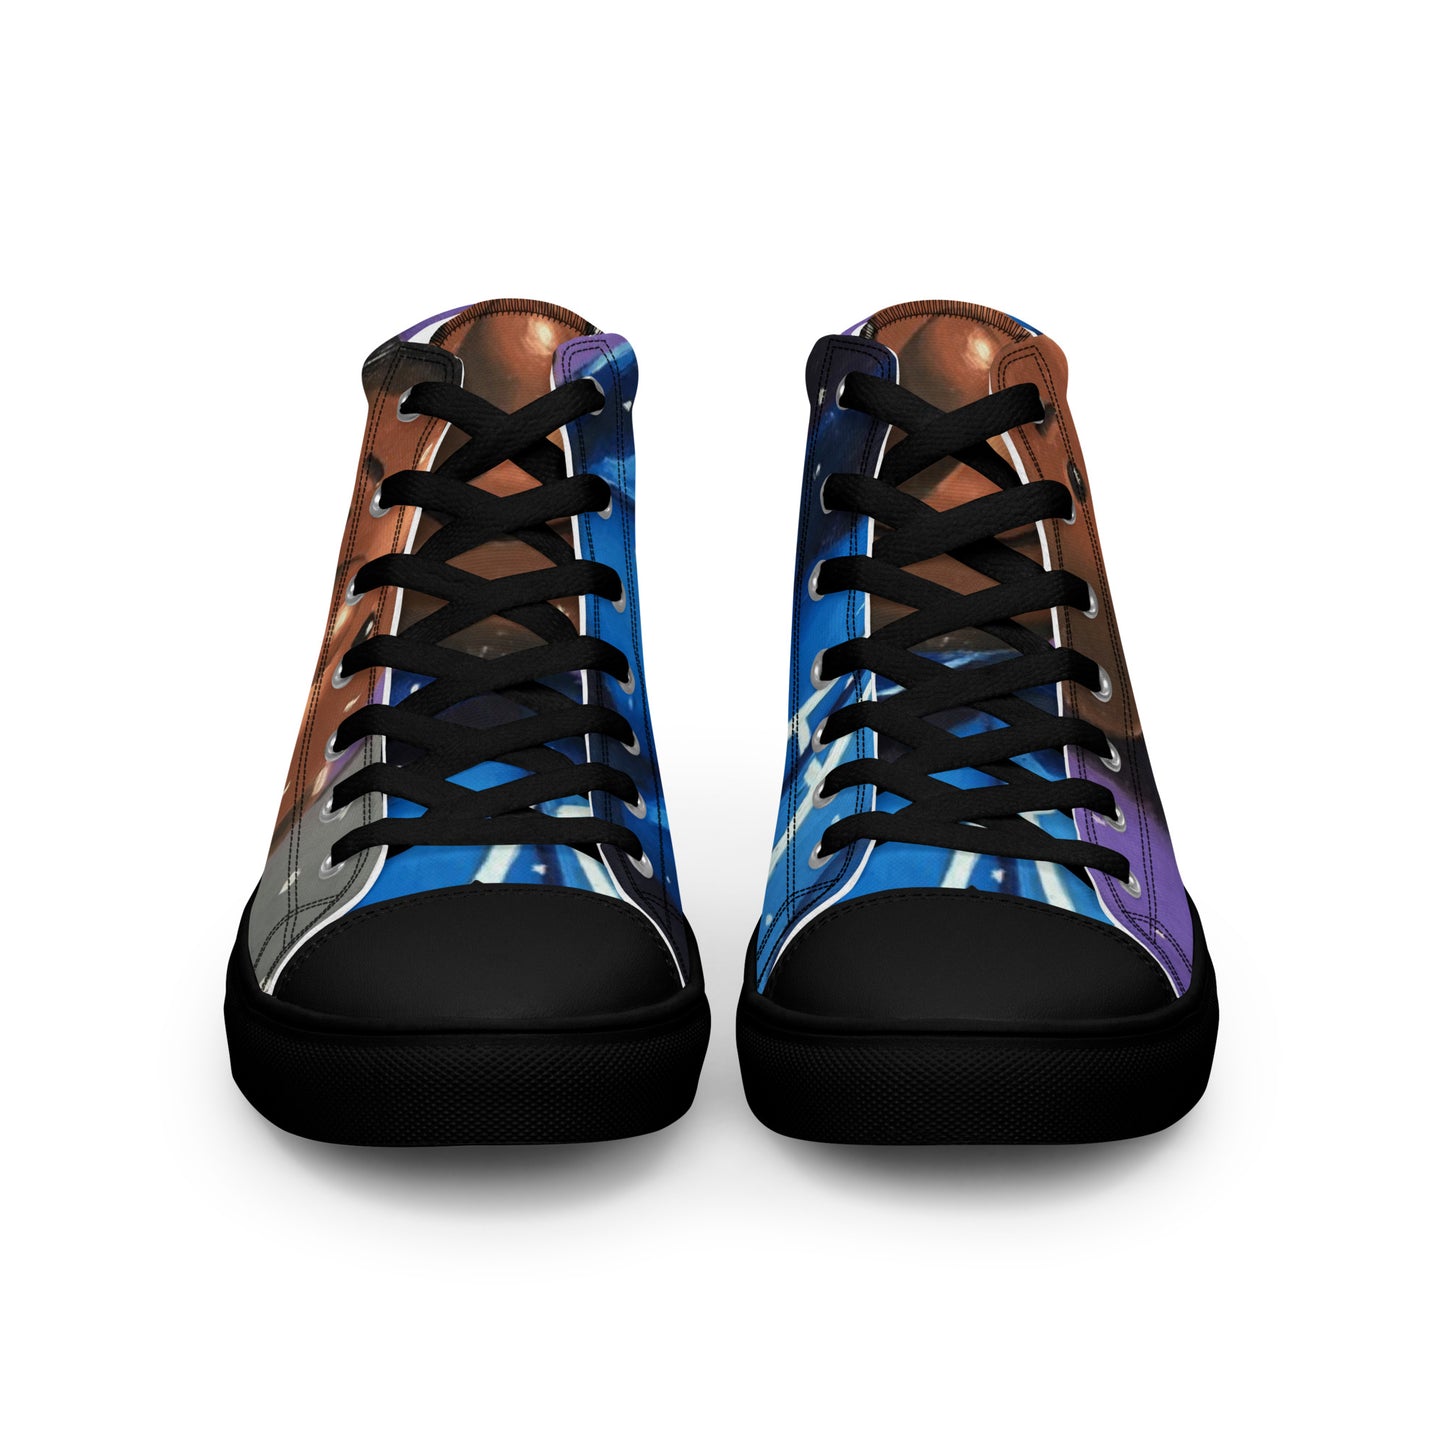 Women’s high top Franklin Armstrong